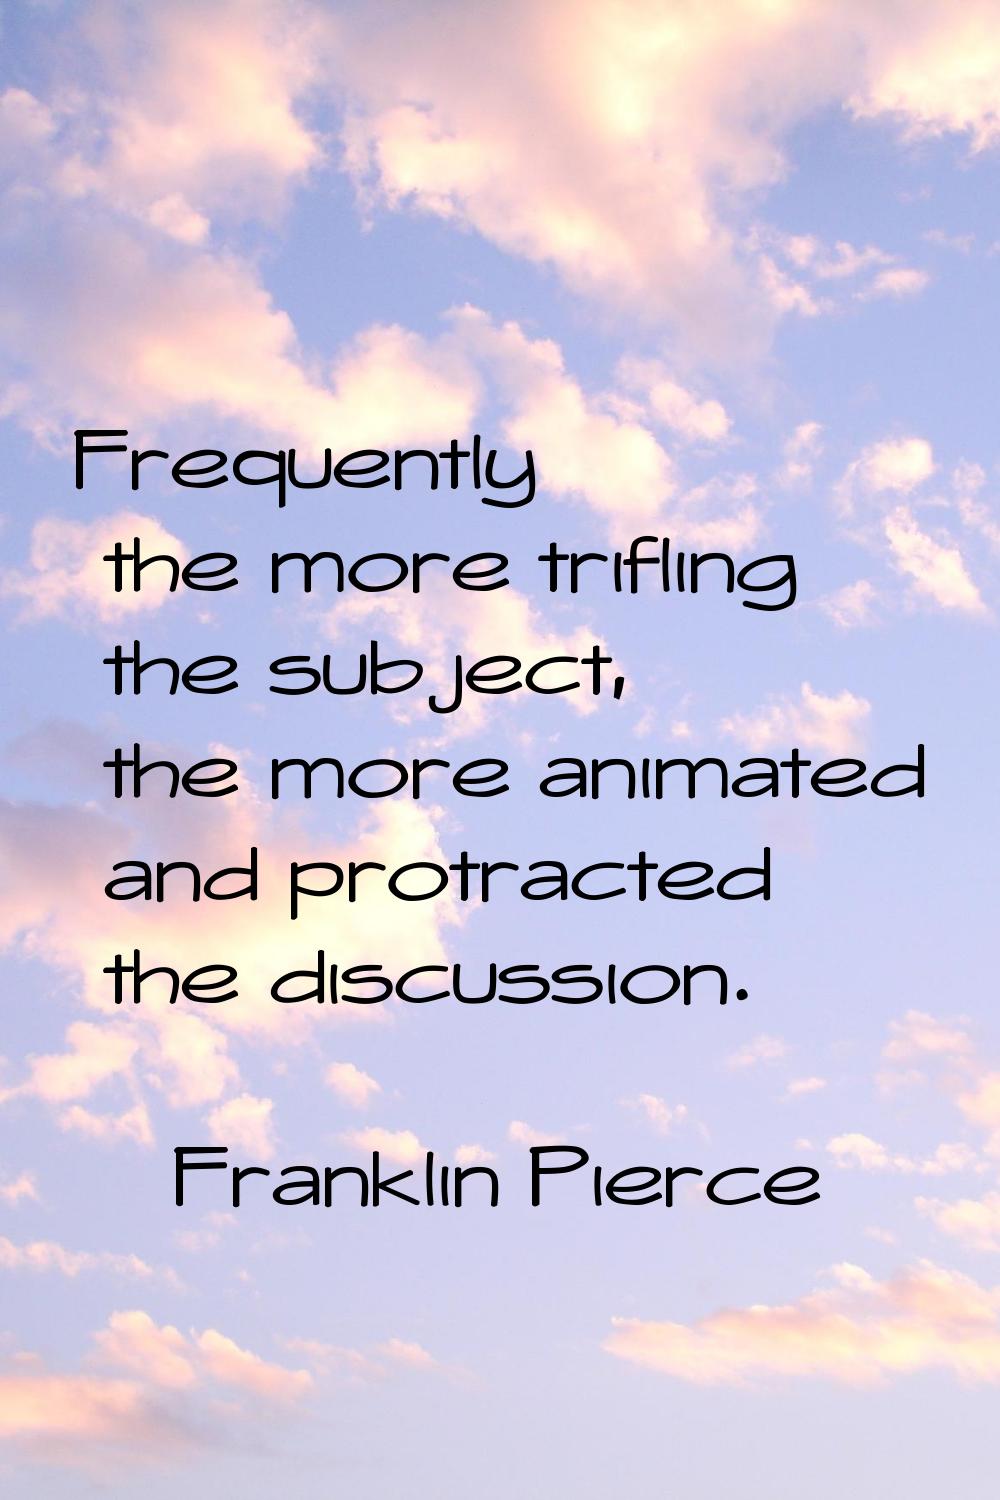 Frequently the more trifling the subject, the more animated and protracted the discussion.